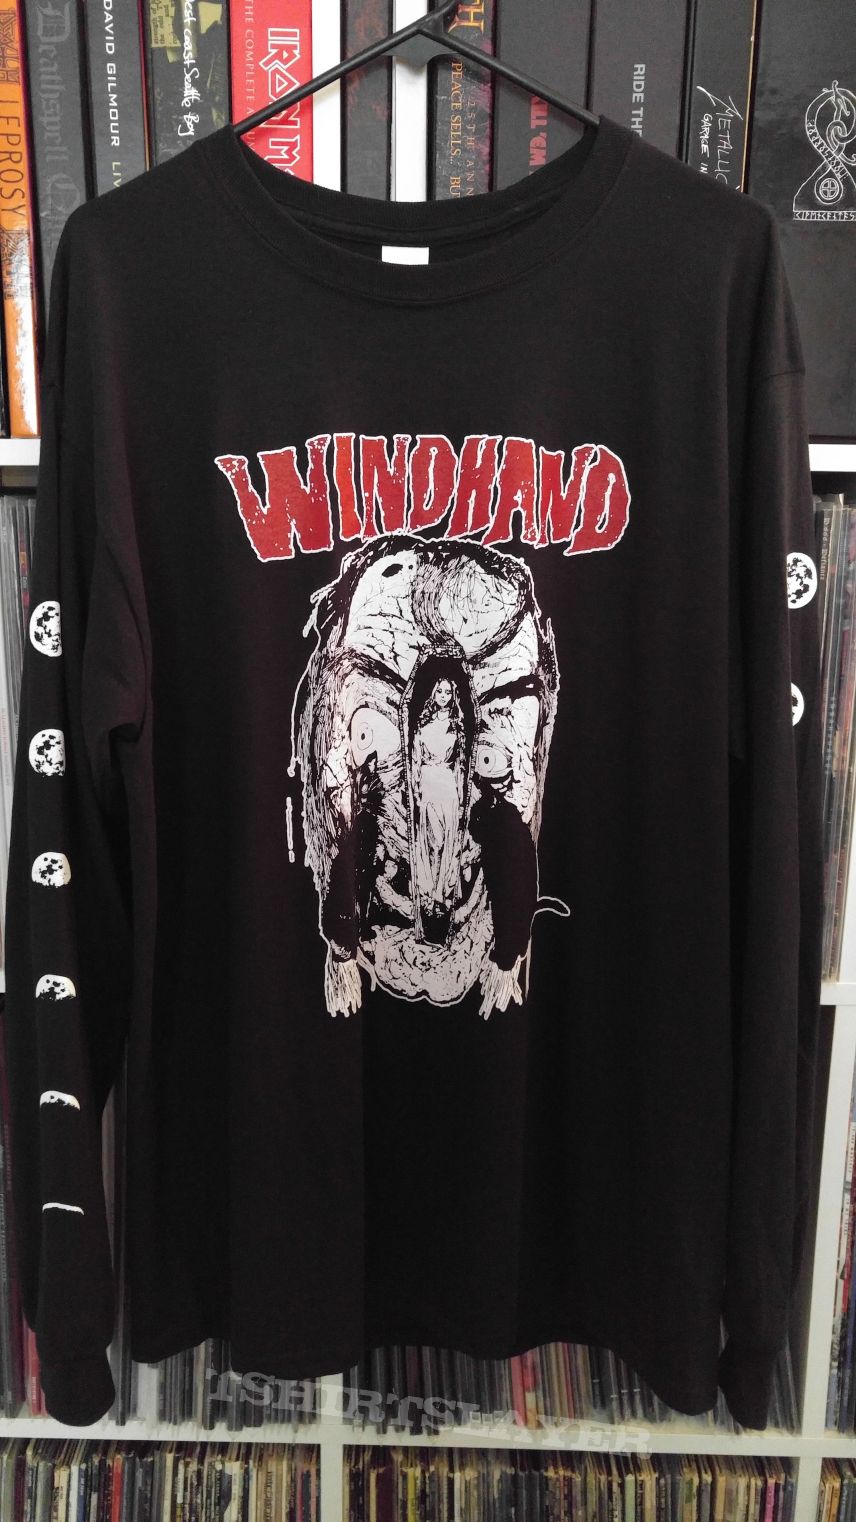 Windhand - Witch long sleeve